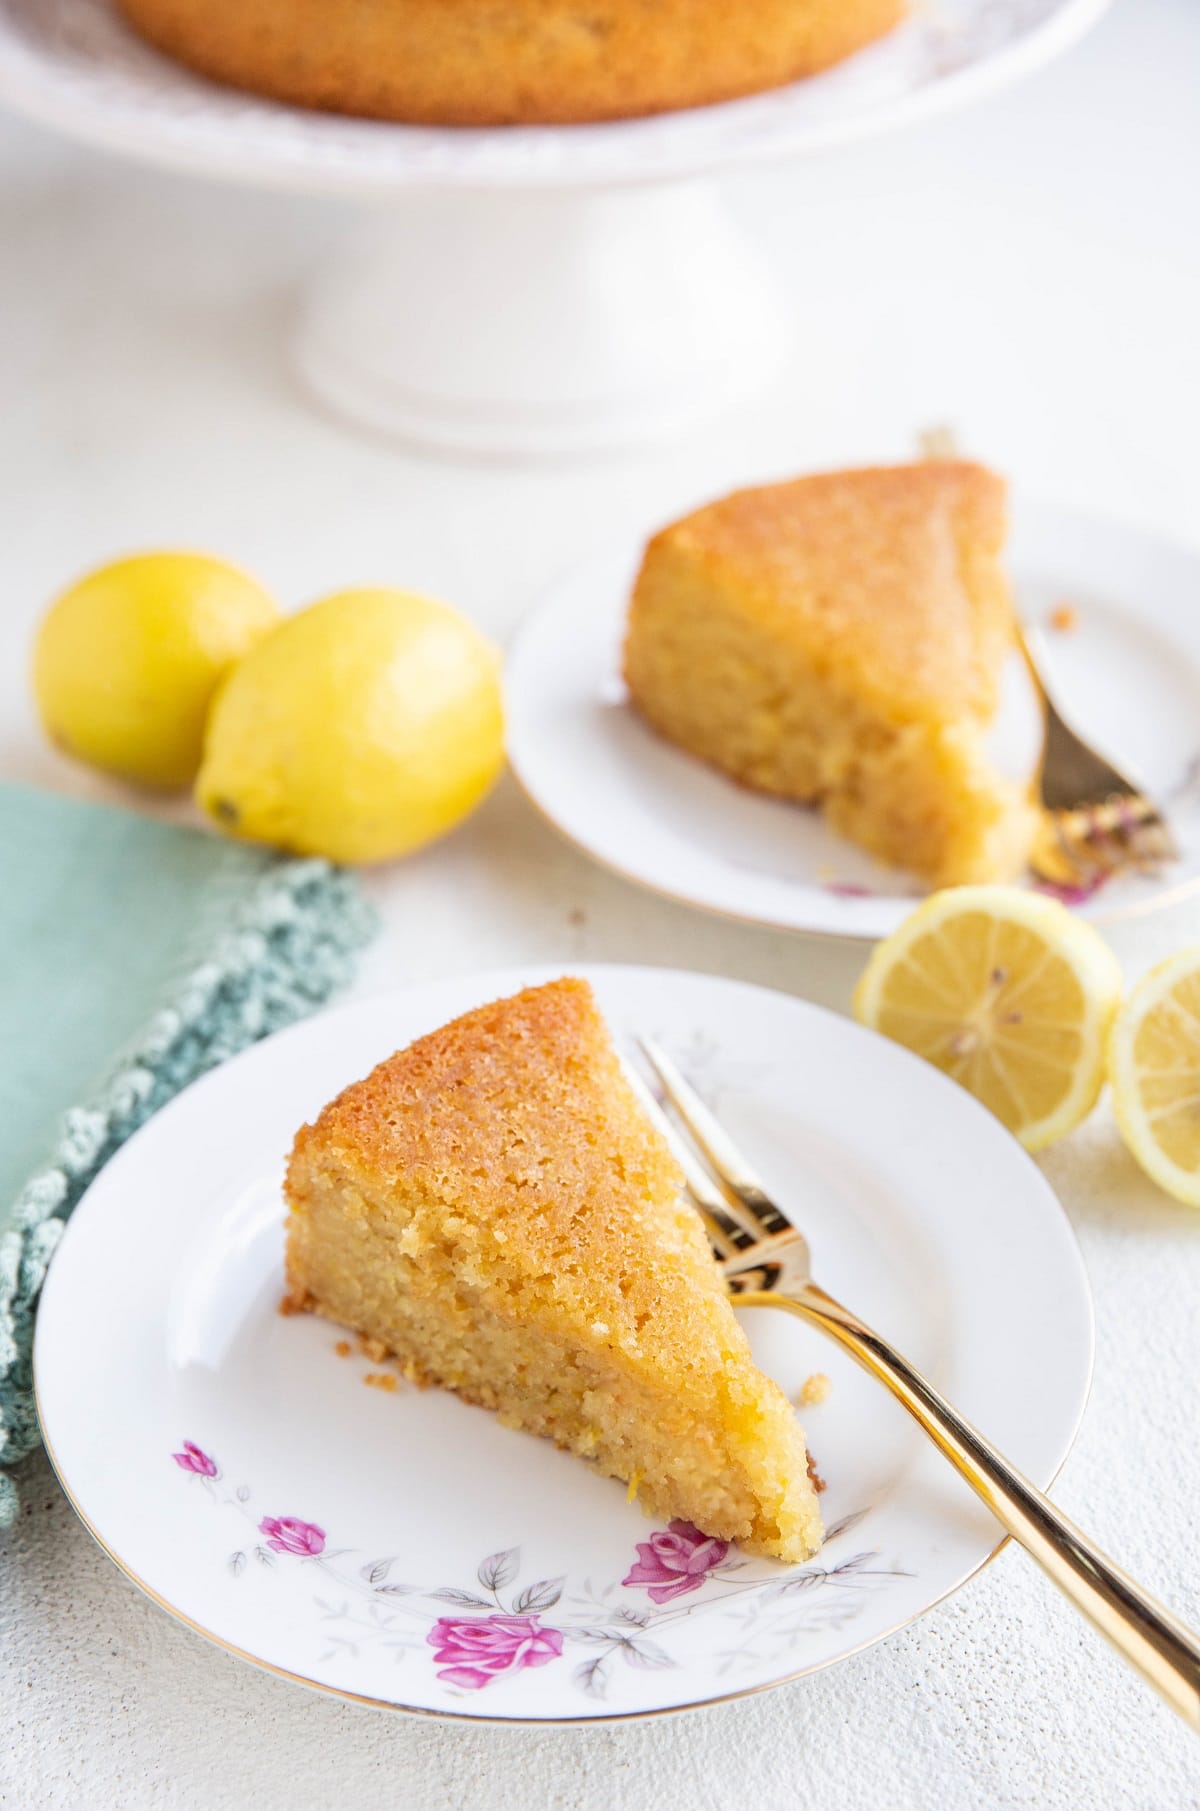 Two slices of lemon cake on plates with the rest of the cake in the background and fresh lemons all around.